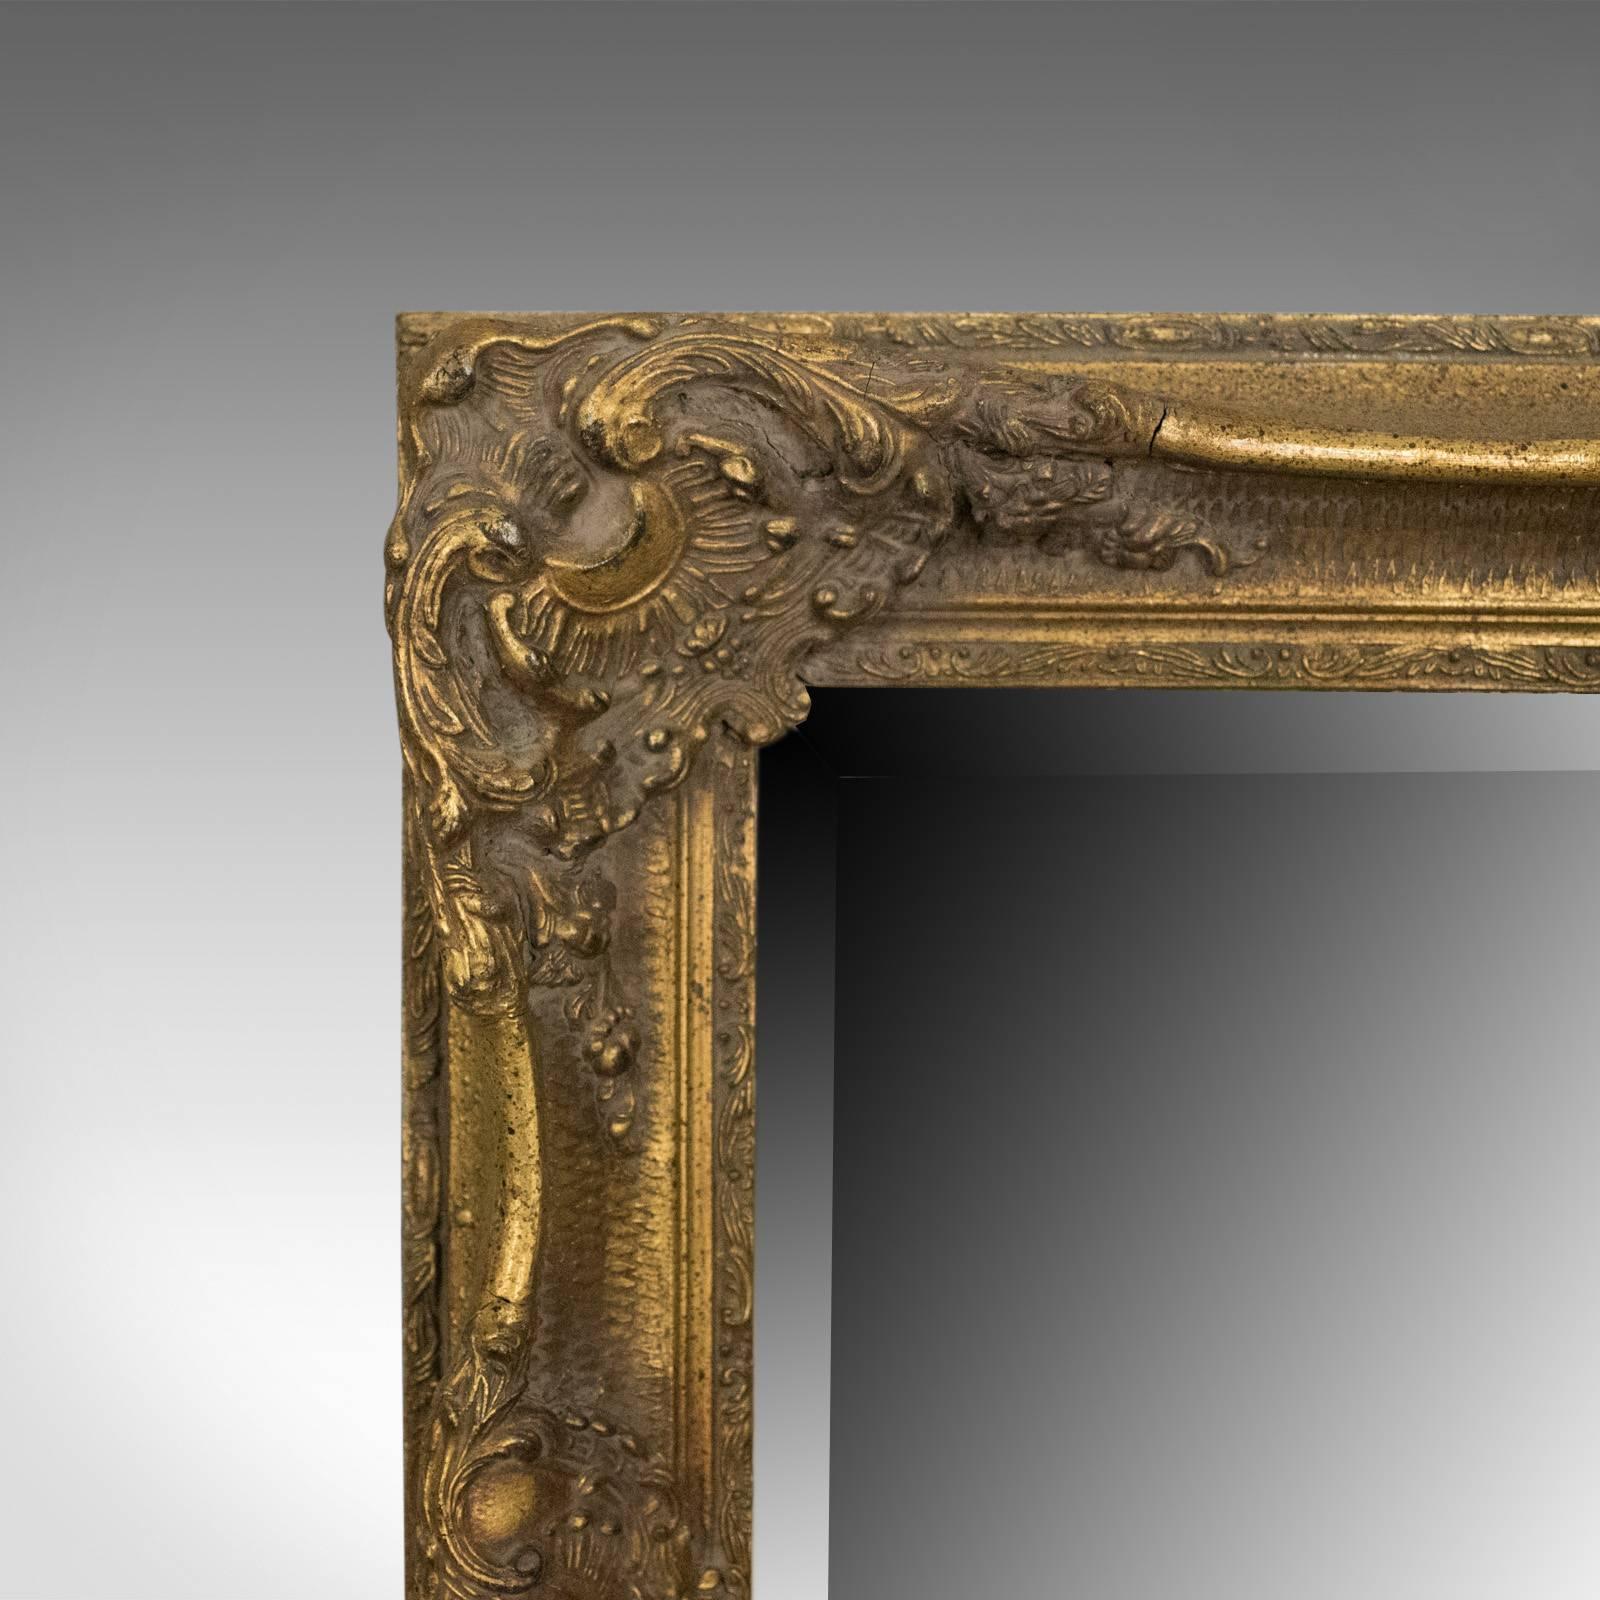 English Wall Mirror in Victorian Classical Revival Taste, Giltwood, Late 20th Century